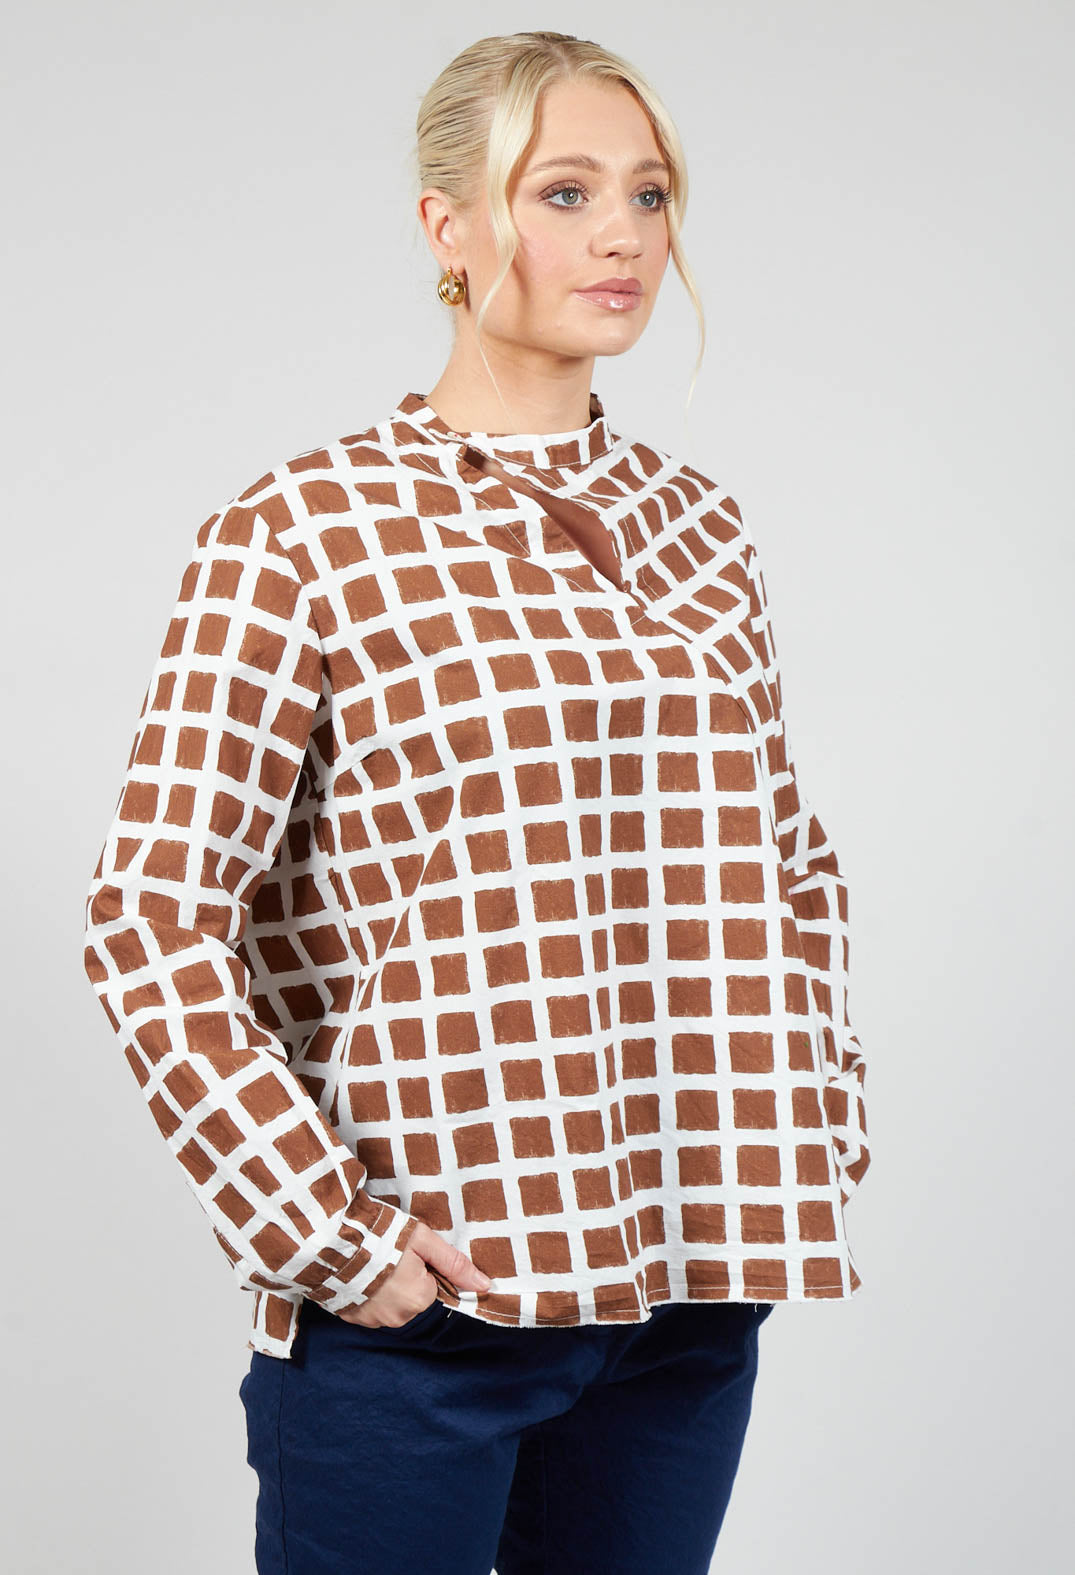 Calipso Shirt in Brown Check